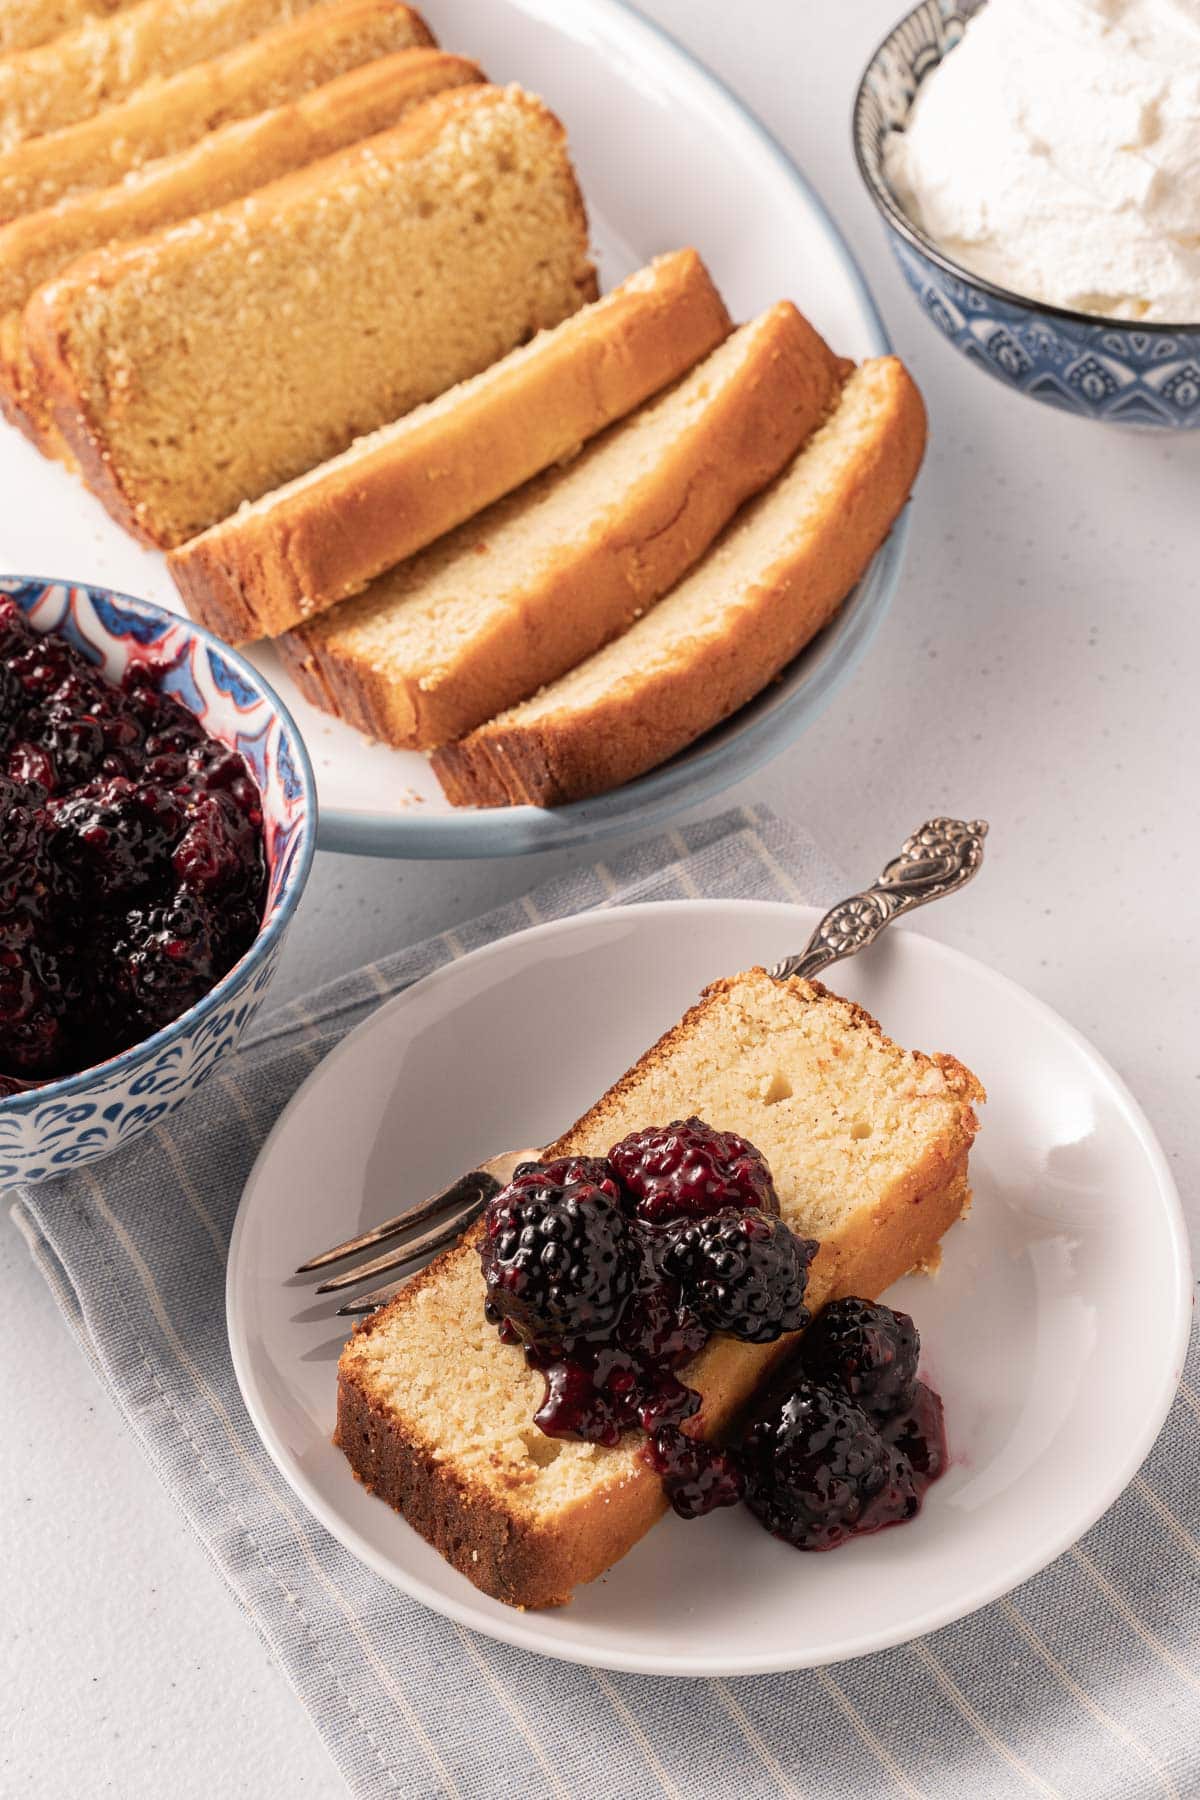 Blackberry compote on a slice of cake in a white bowl.